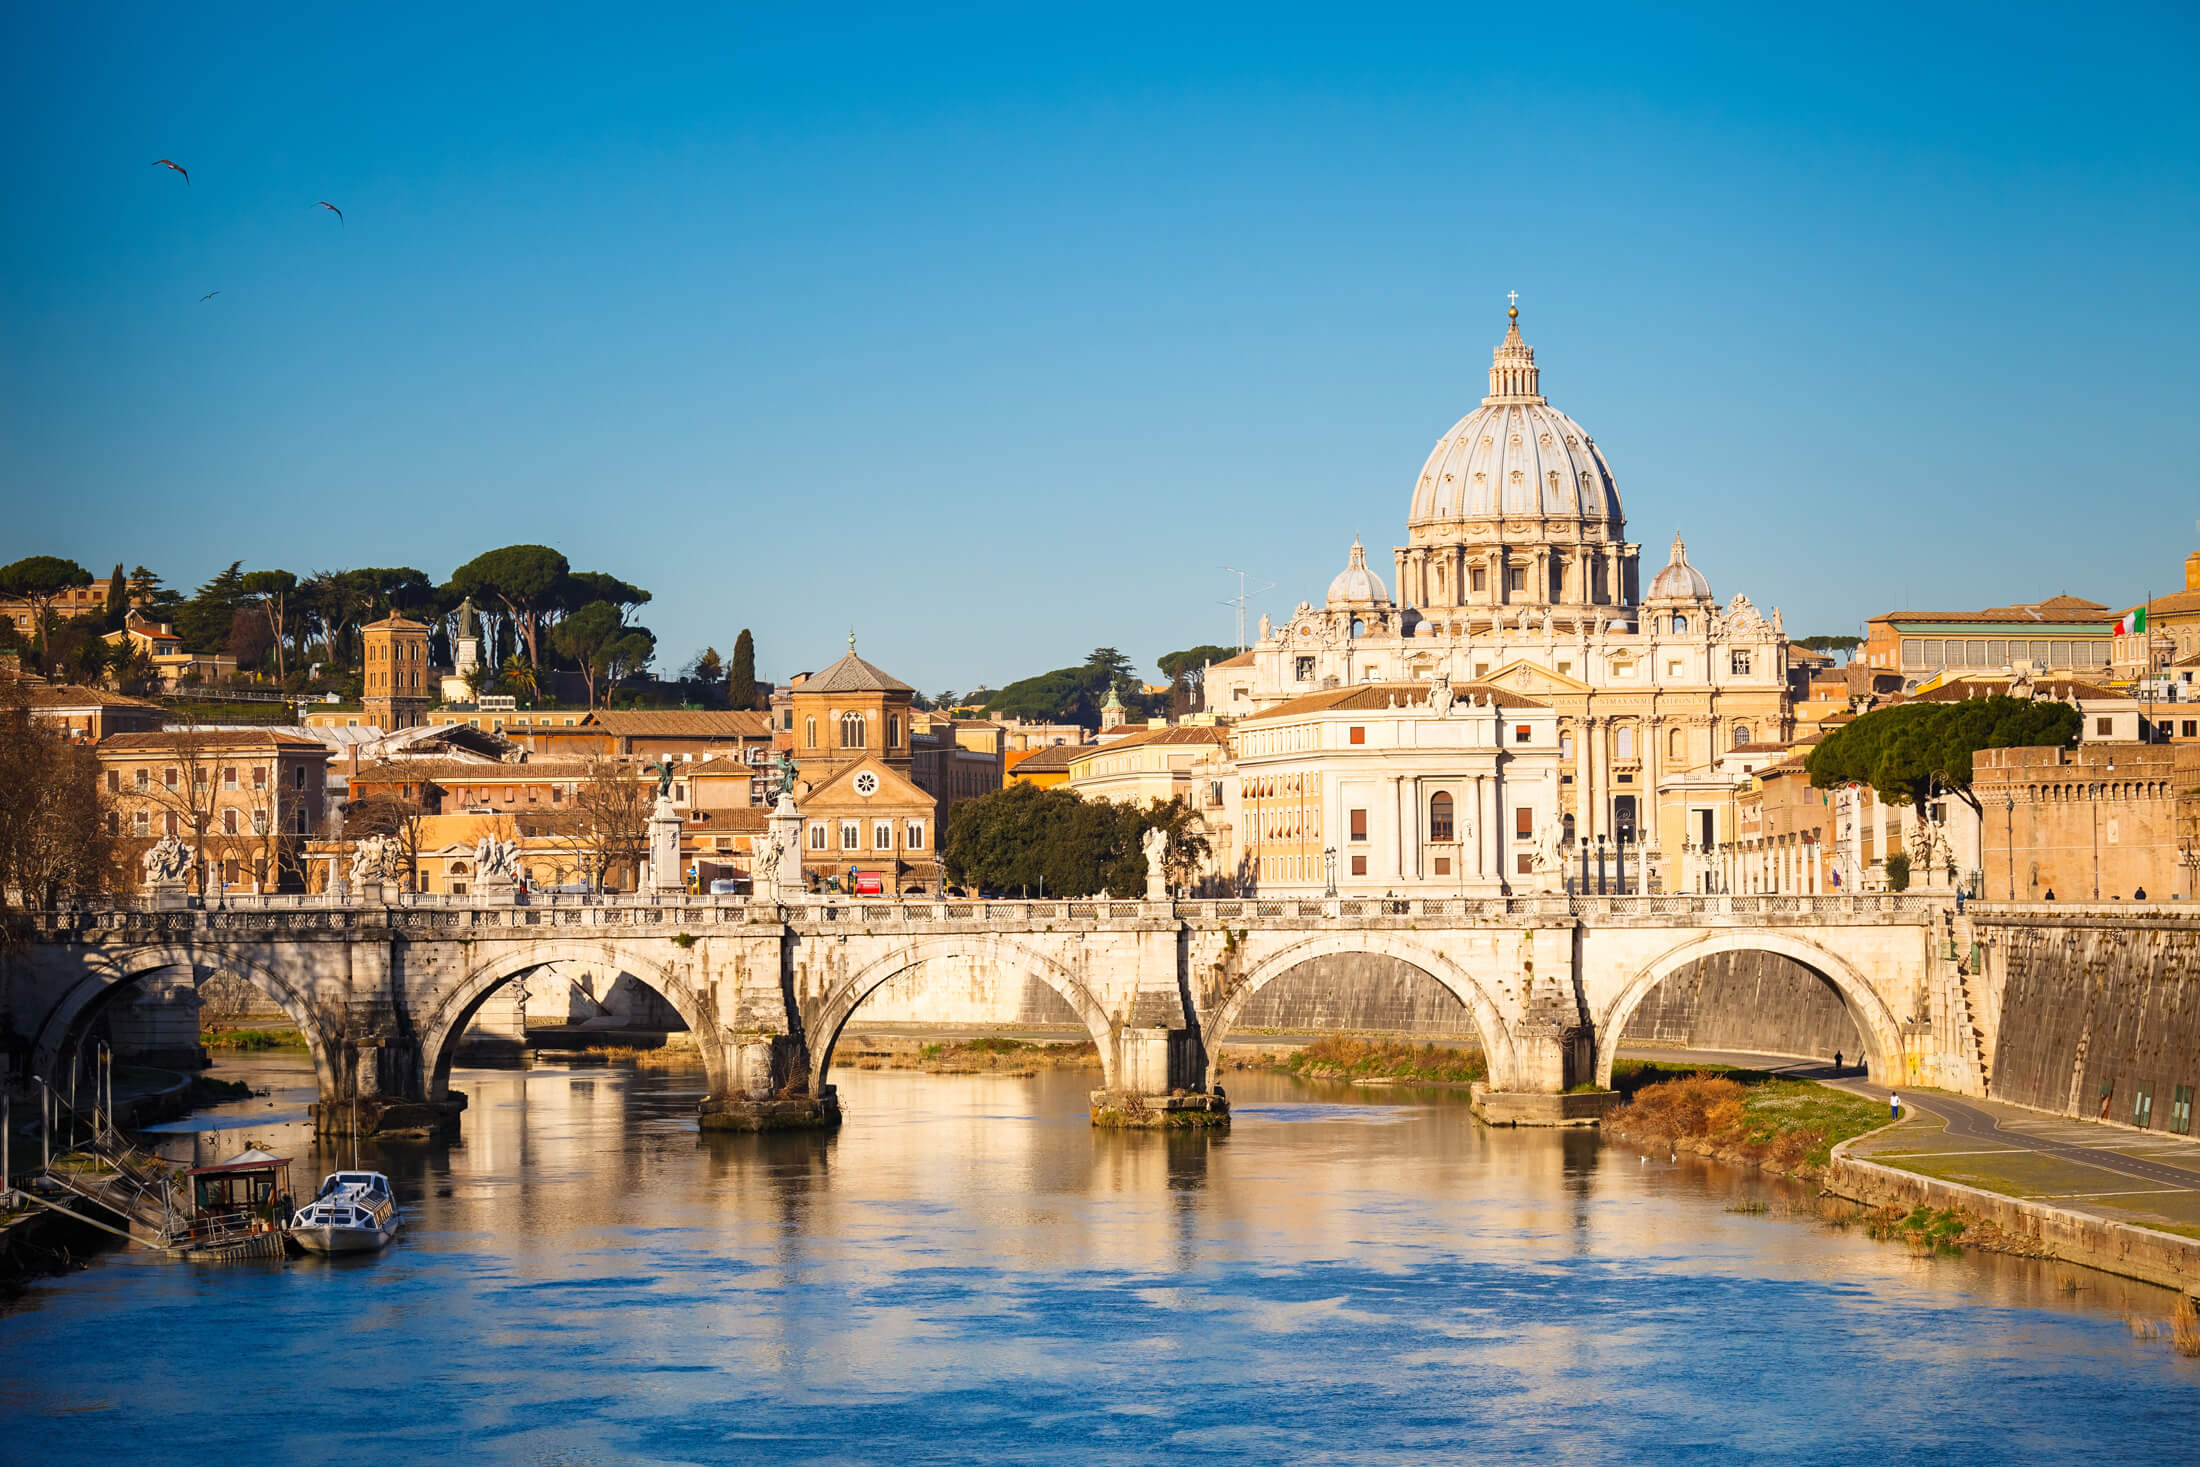 Looking up the River Tiber to St Peter's Basilica in Rome, Italy